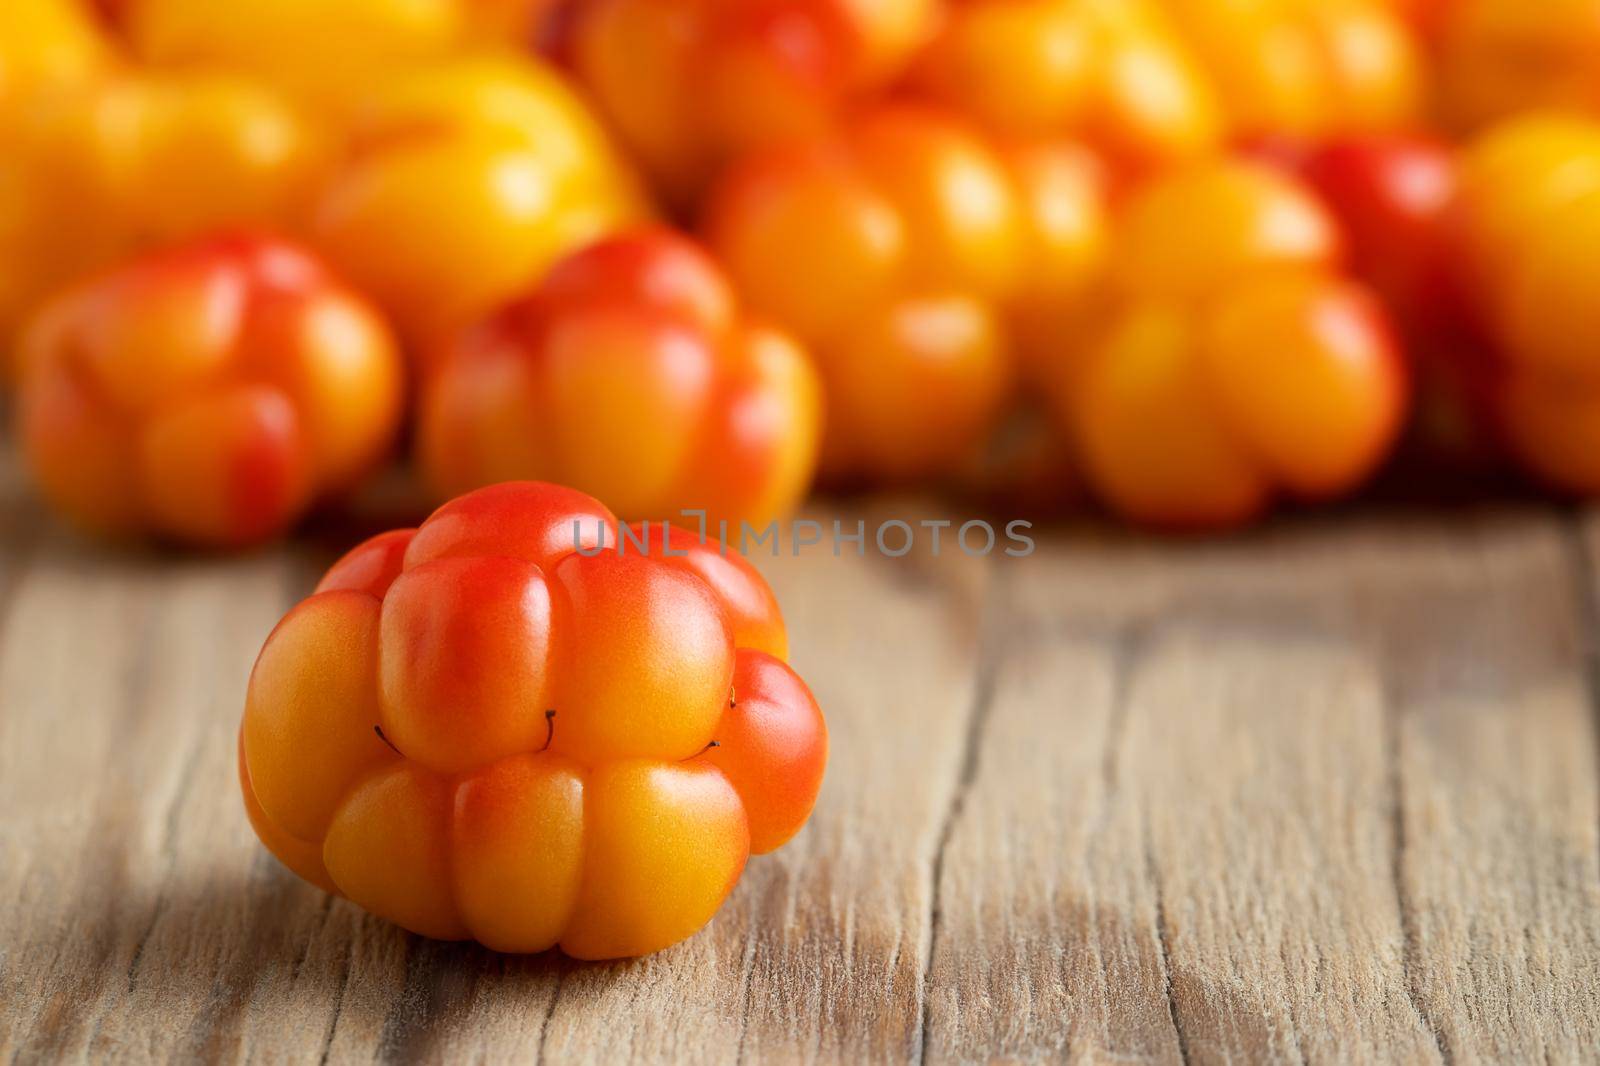 Fresh ripe cloudberries on a wooden table close-up. Selective focus.